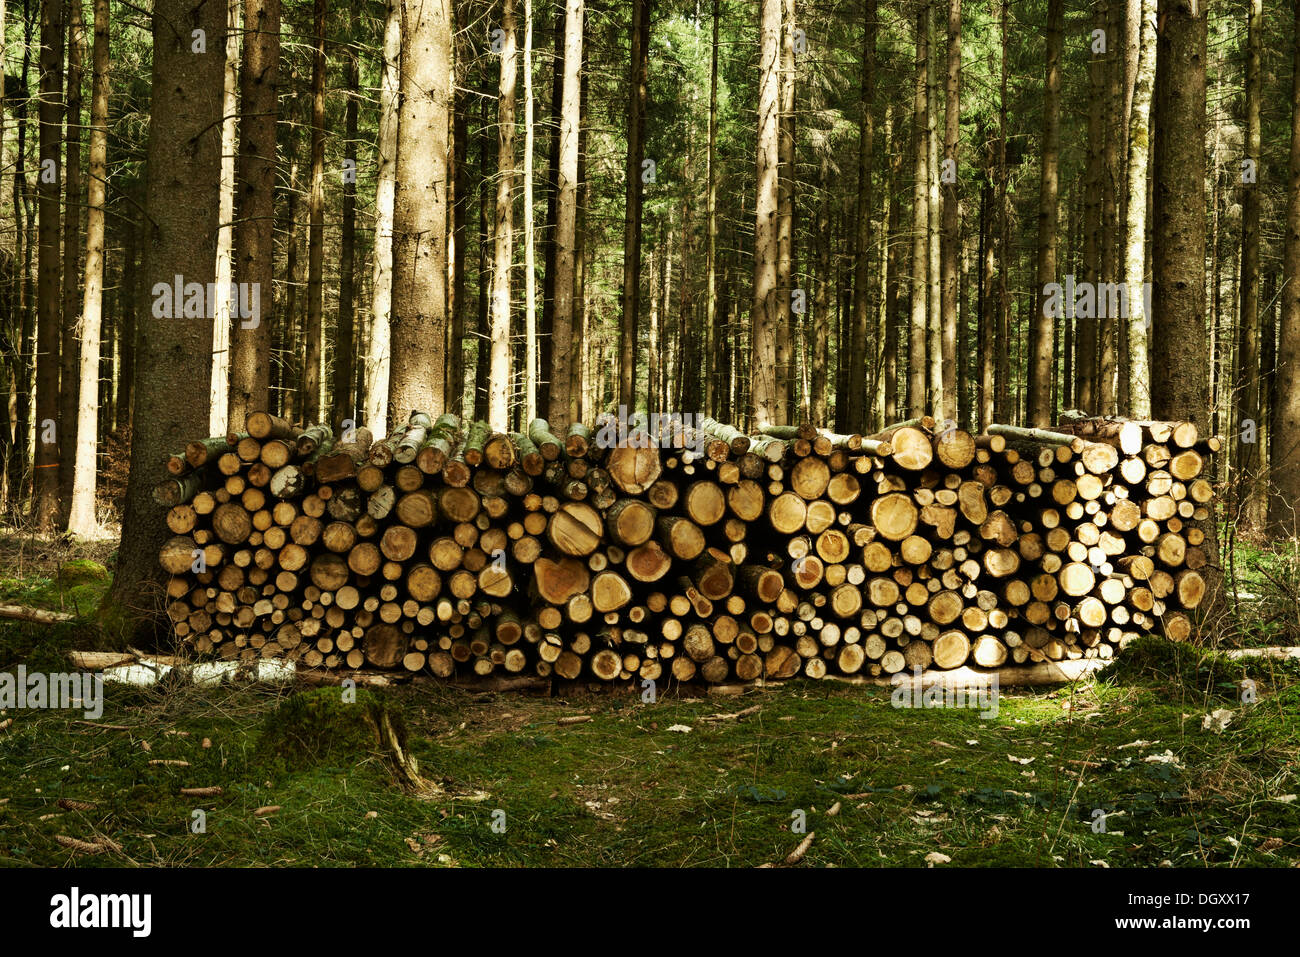 Stack of wood, spruce logs in a spruce forest, Starnberg, Gauting, Upper Bavaria, Bavaria, Germany Stock Photo